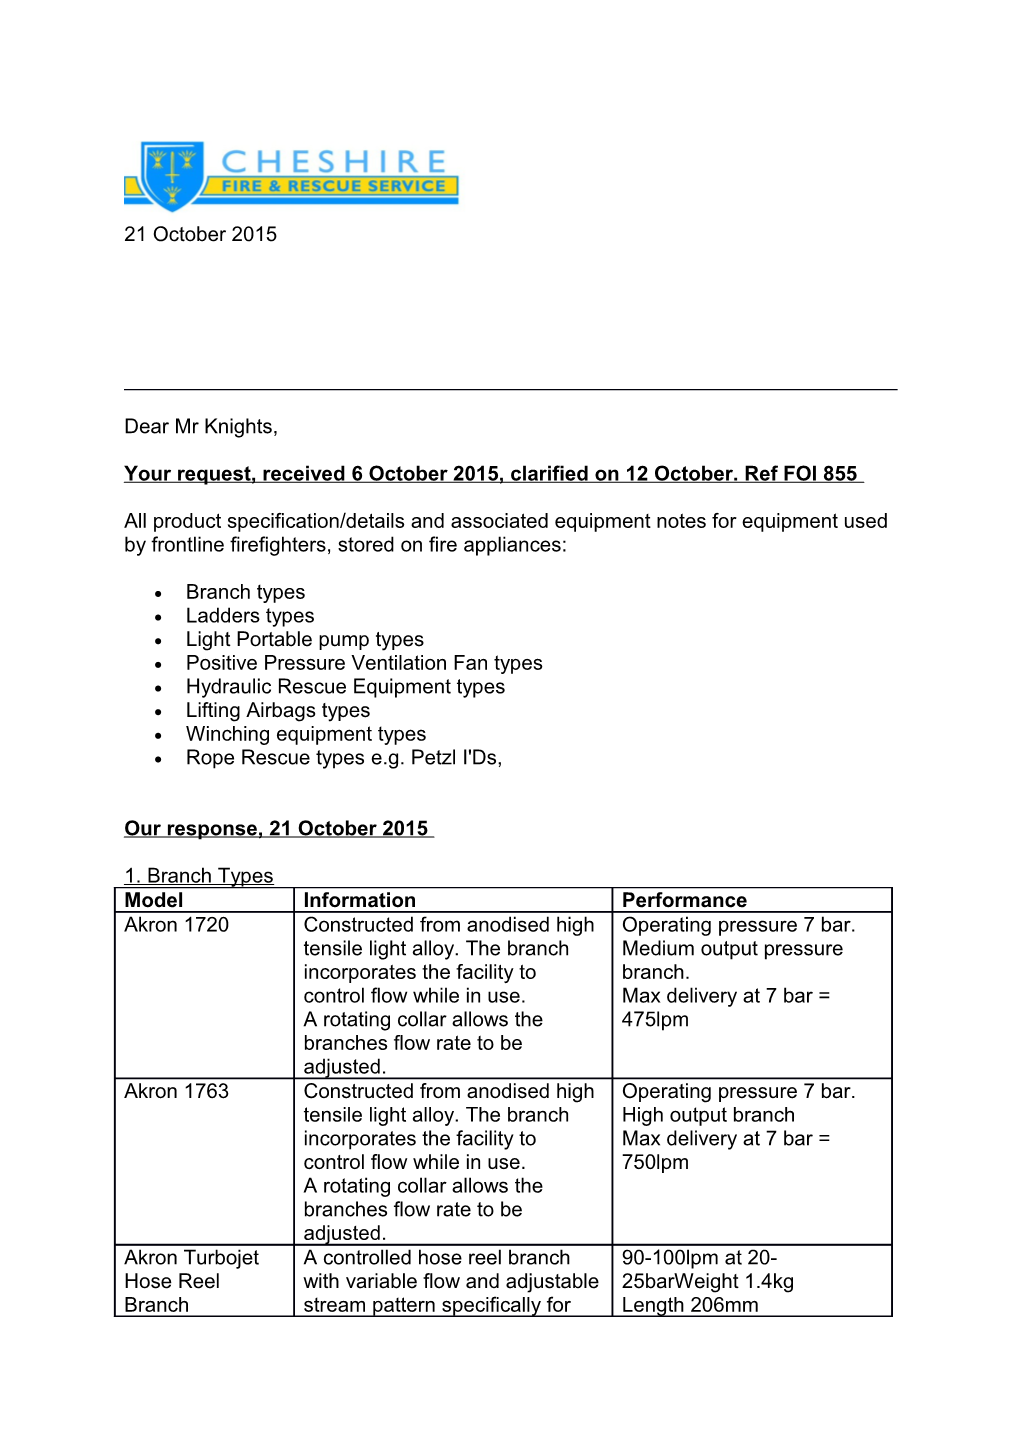 Your Request, Received 6 October 2015, Clarified on 12 October. Ref FOI 855